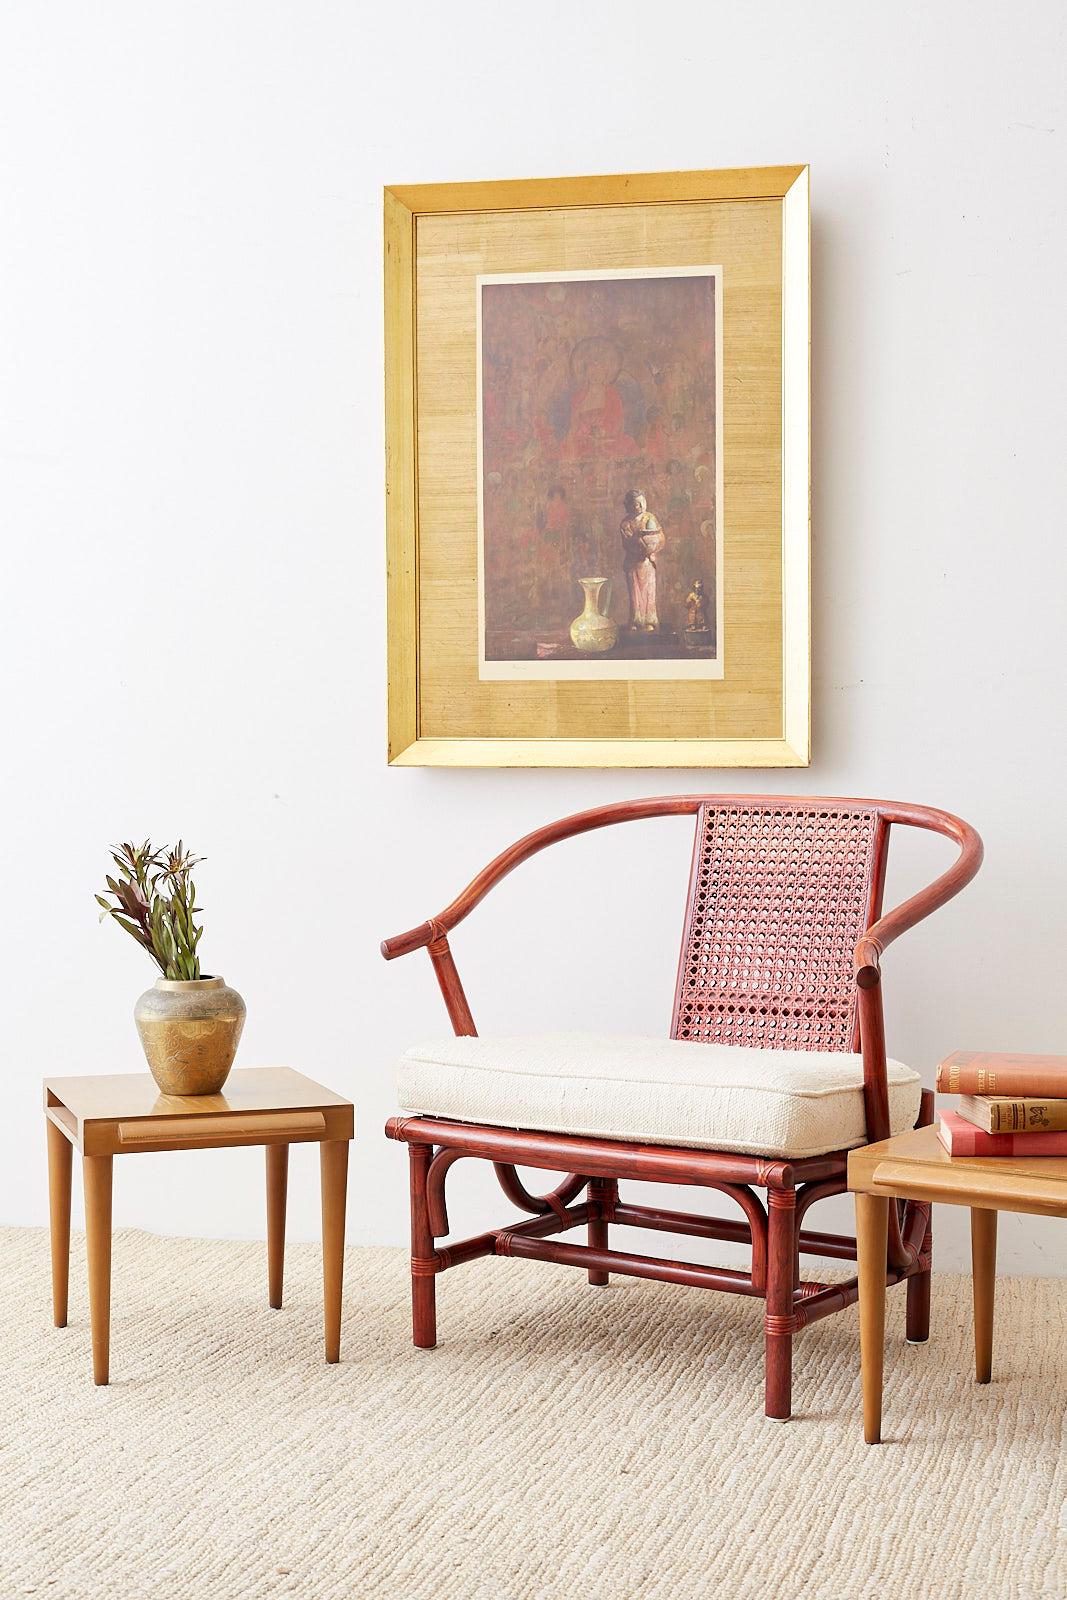 Chinese Ming style bamboo rattan horseshoe armchair by Baker Furniture features an oversized frame with a caned backsplat. Finished in a rich crimson red lacquer with a fitted seat cushion. Beautifully crafted and finished with Baker label affixed